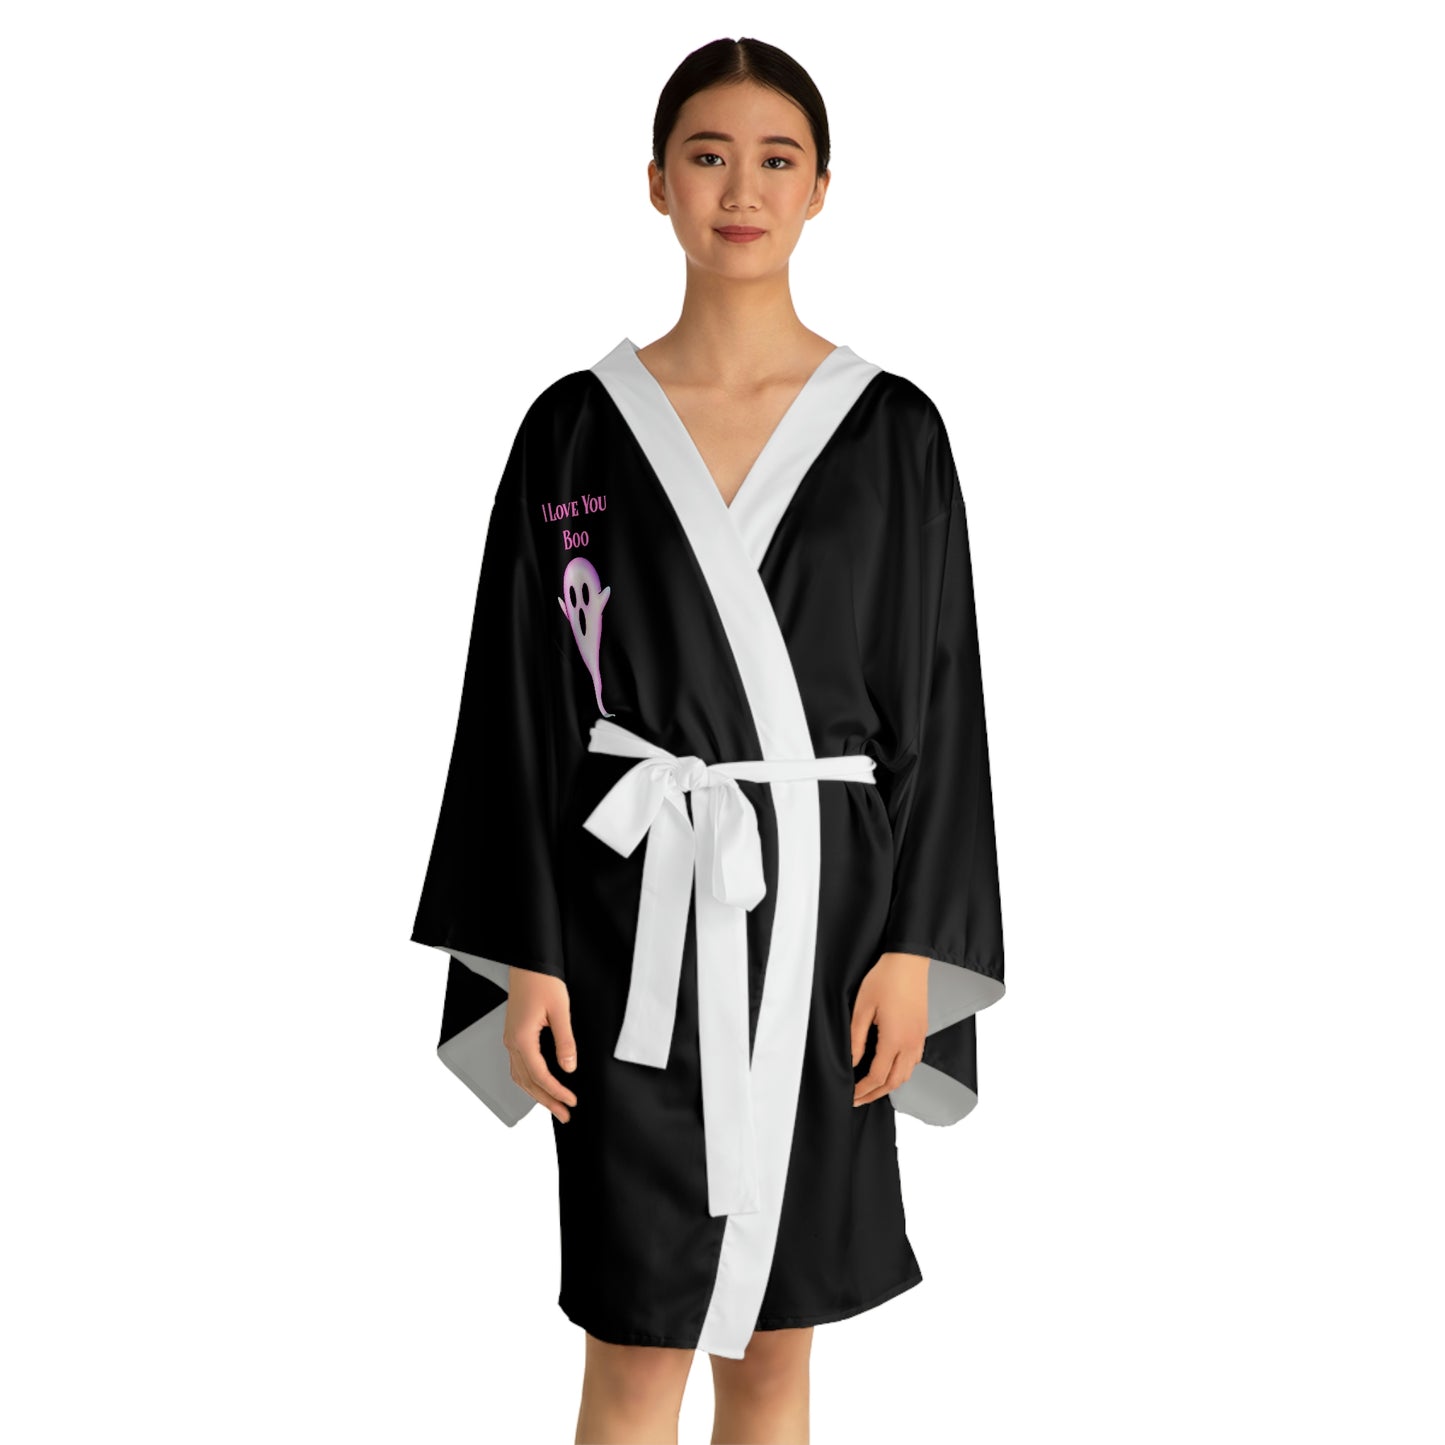 I Love You Boo White Trim Robe - Witchy Kitchens